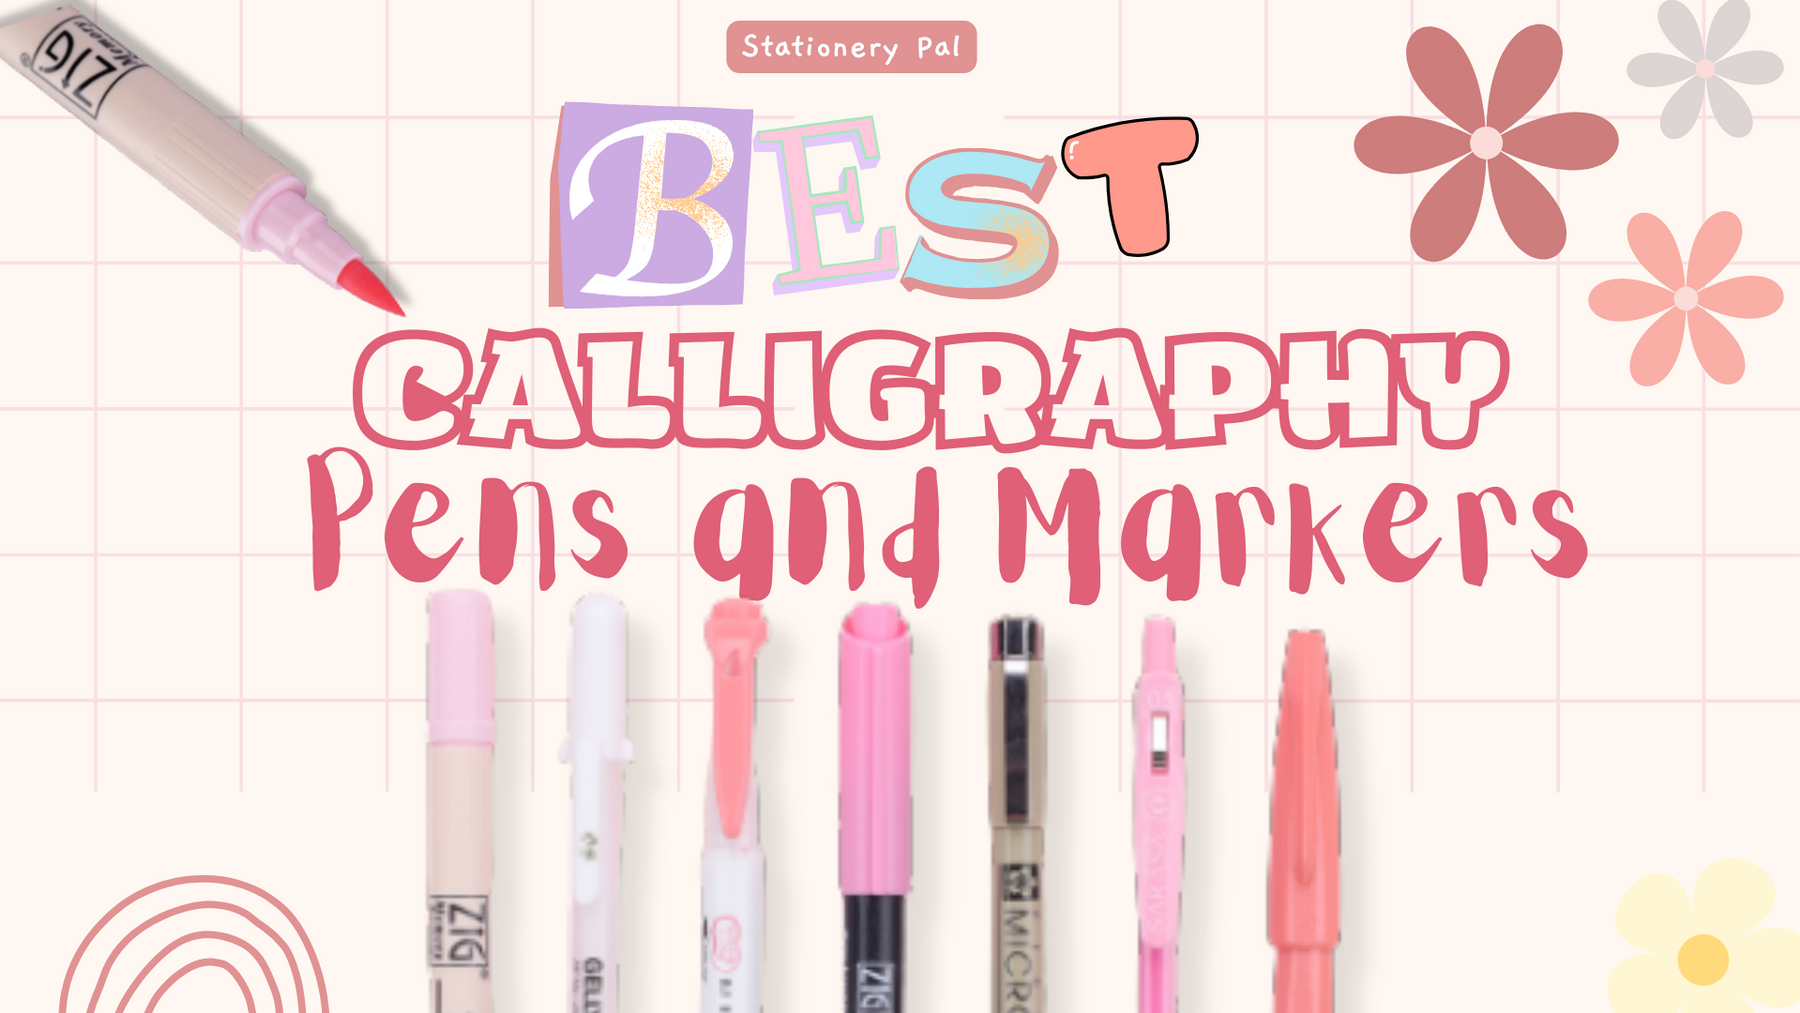 Best Calligraphy Pens and Markers